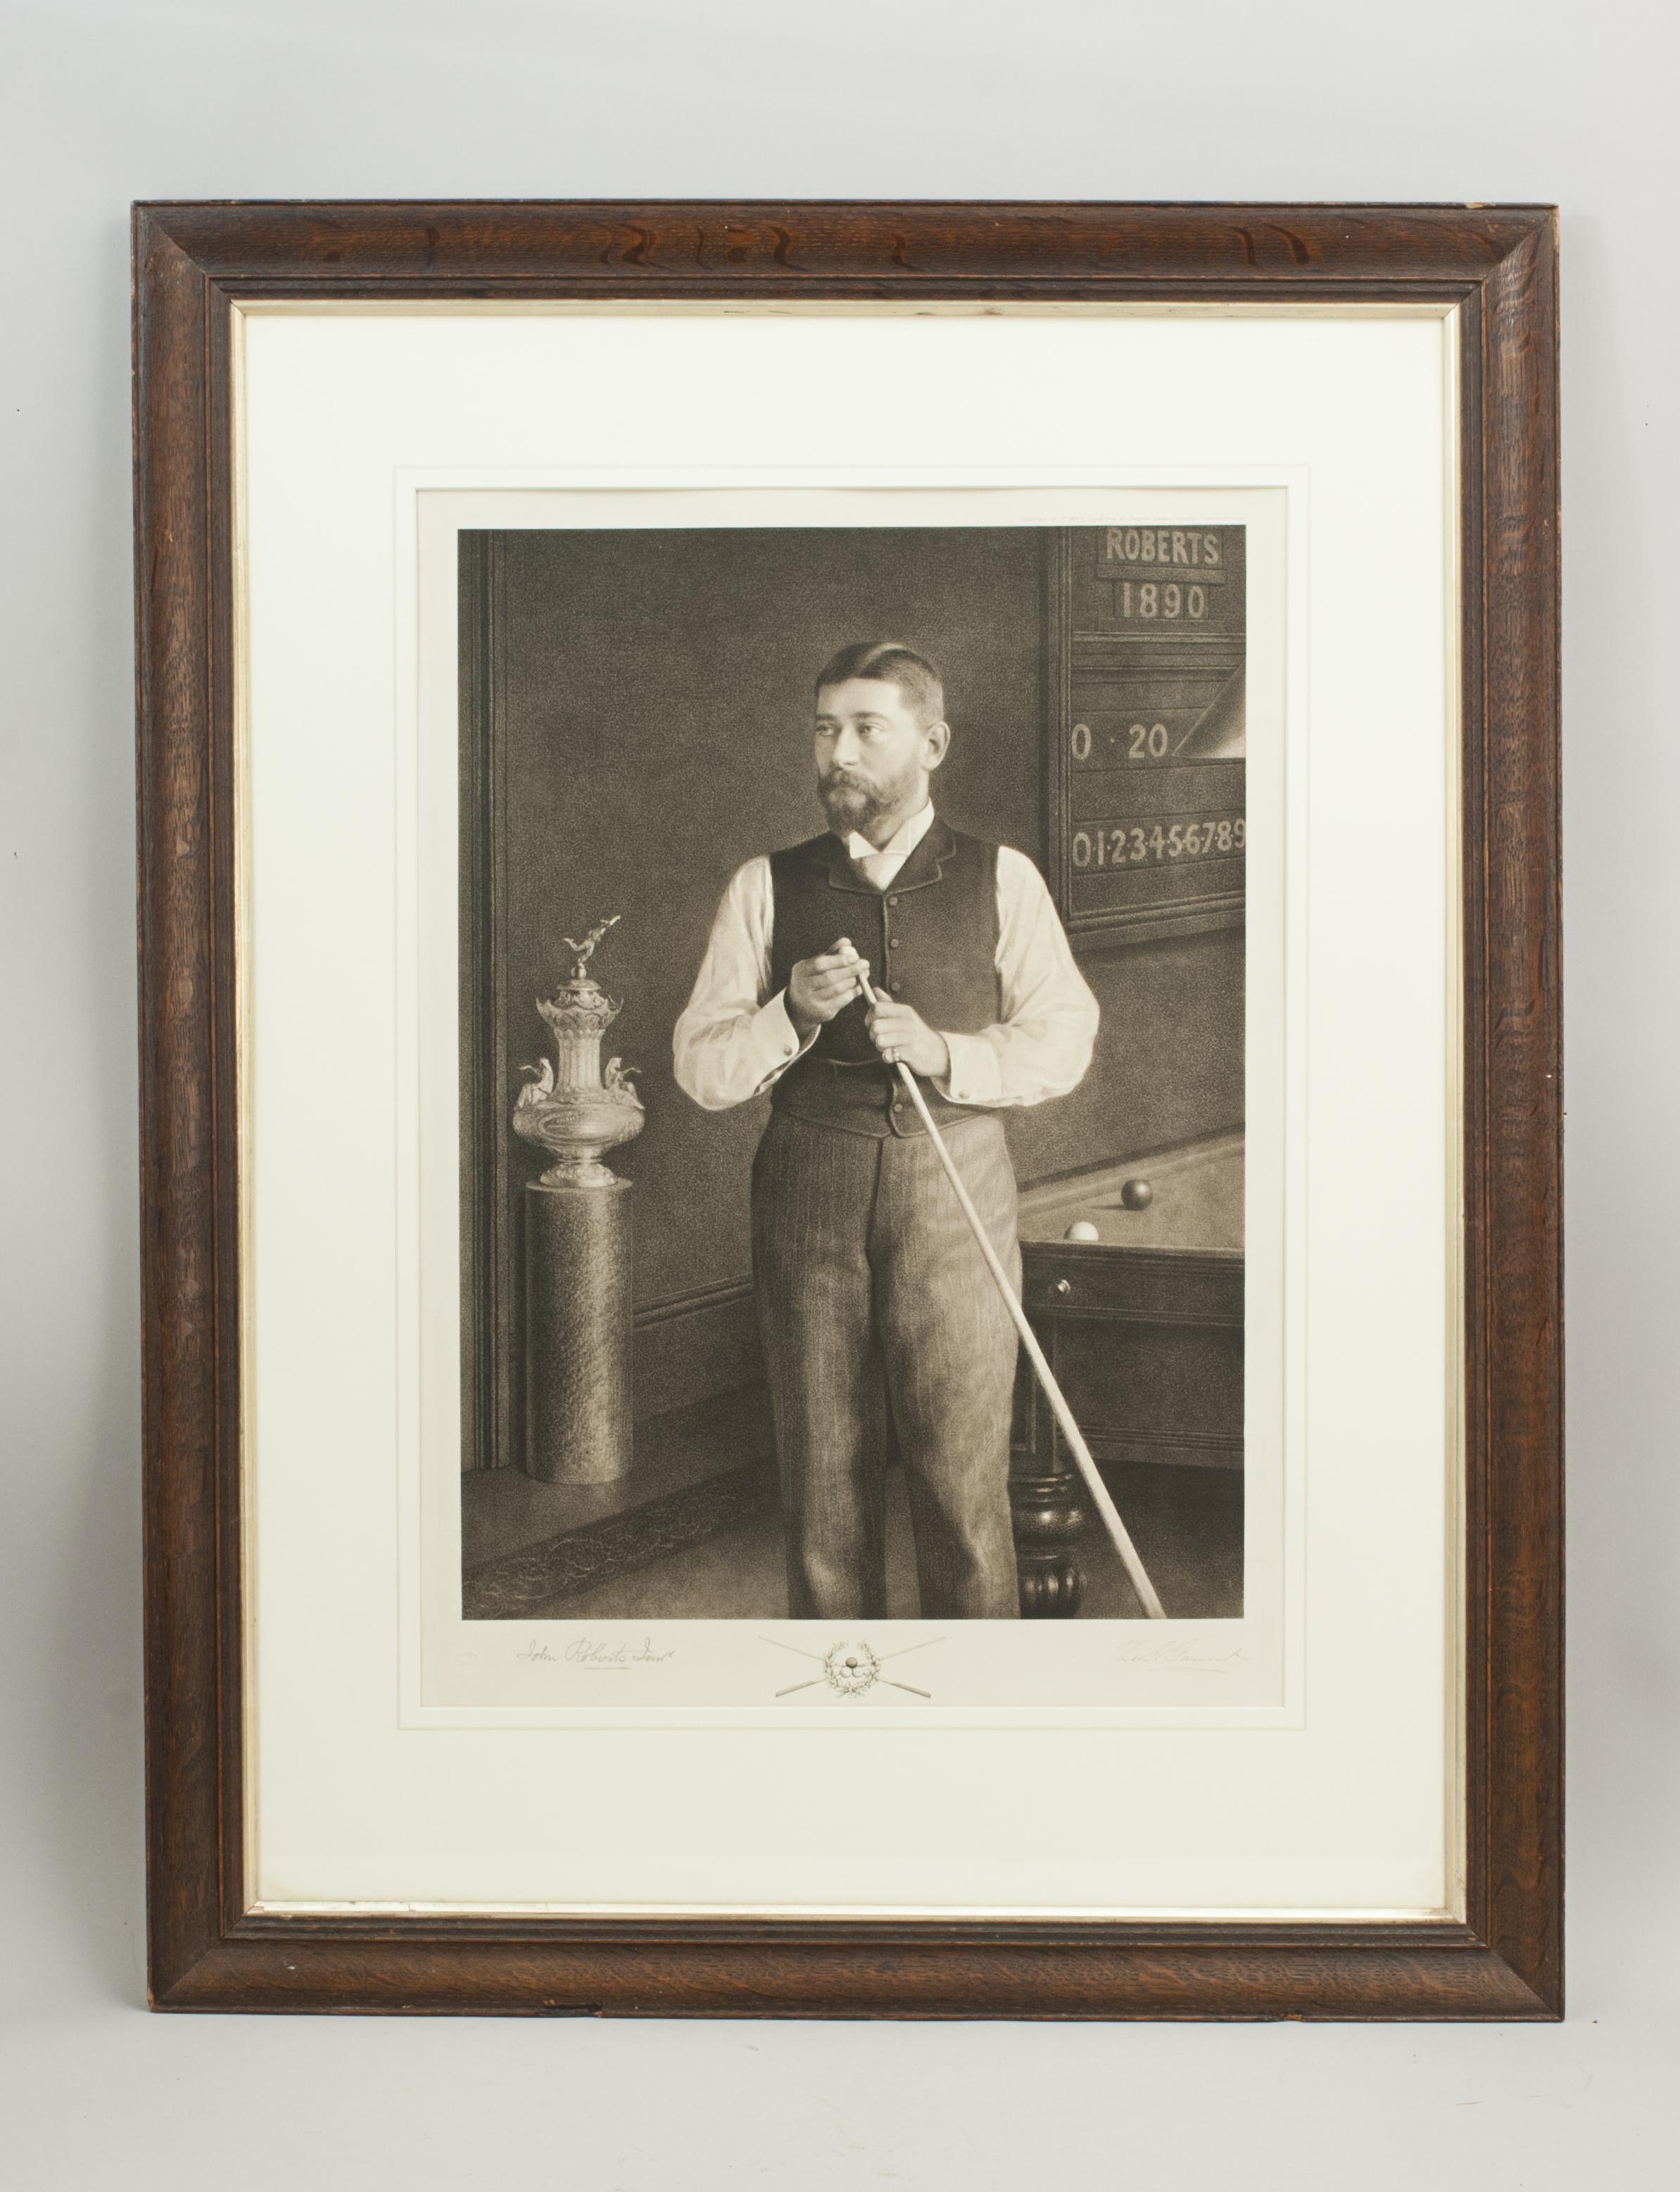 John Roberts Junior Photogravure.
Late 19th century study of John Roberts Junior, billiards player, signed in pencil by John Roberts Junior and the artist Thomas Edward Gaunt.
Roberts died in Worthing in 1919 at 71 years of age, some 24 years